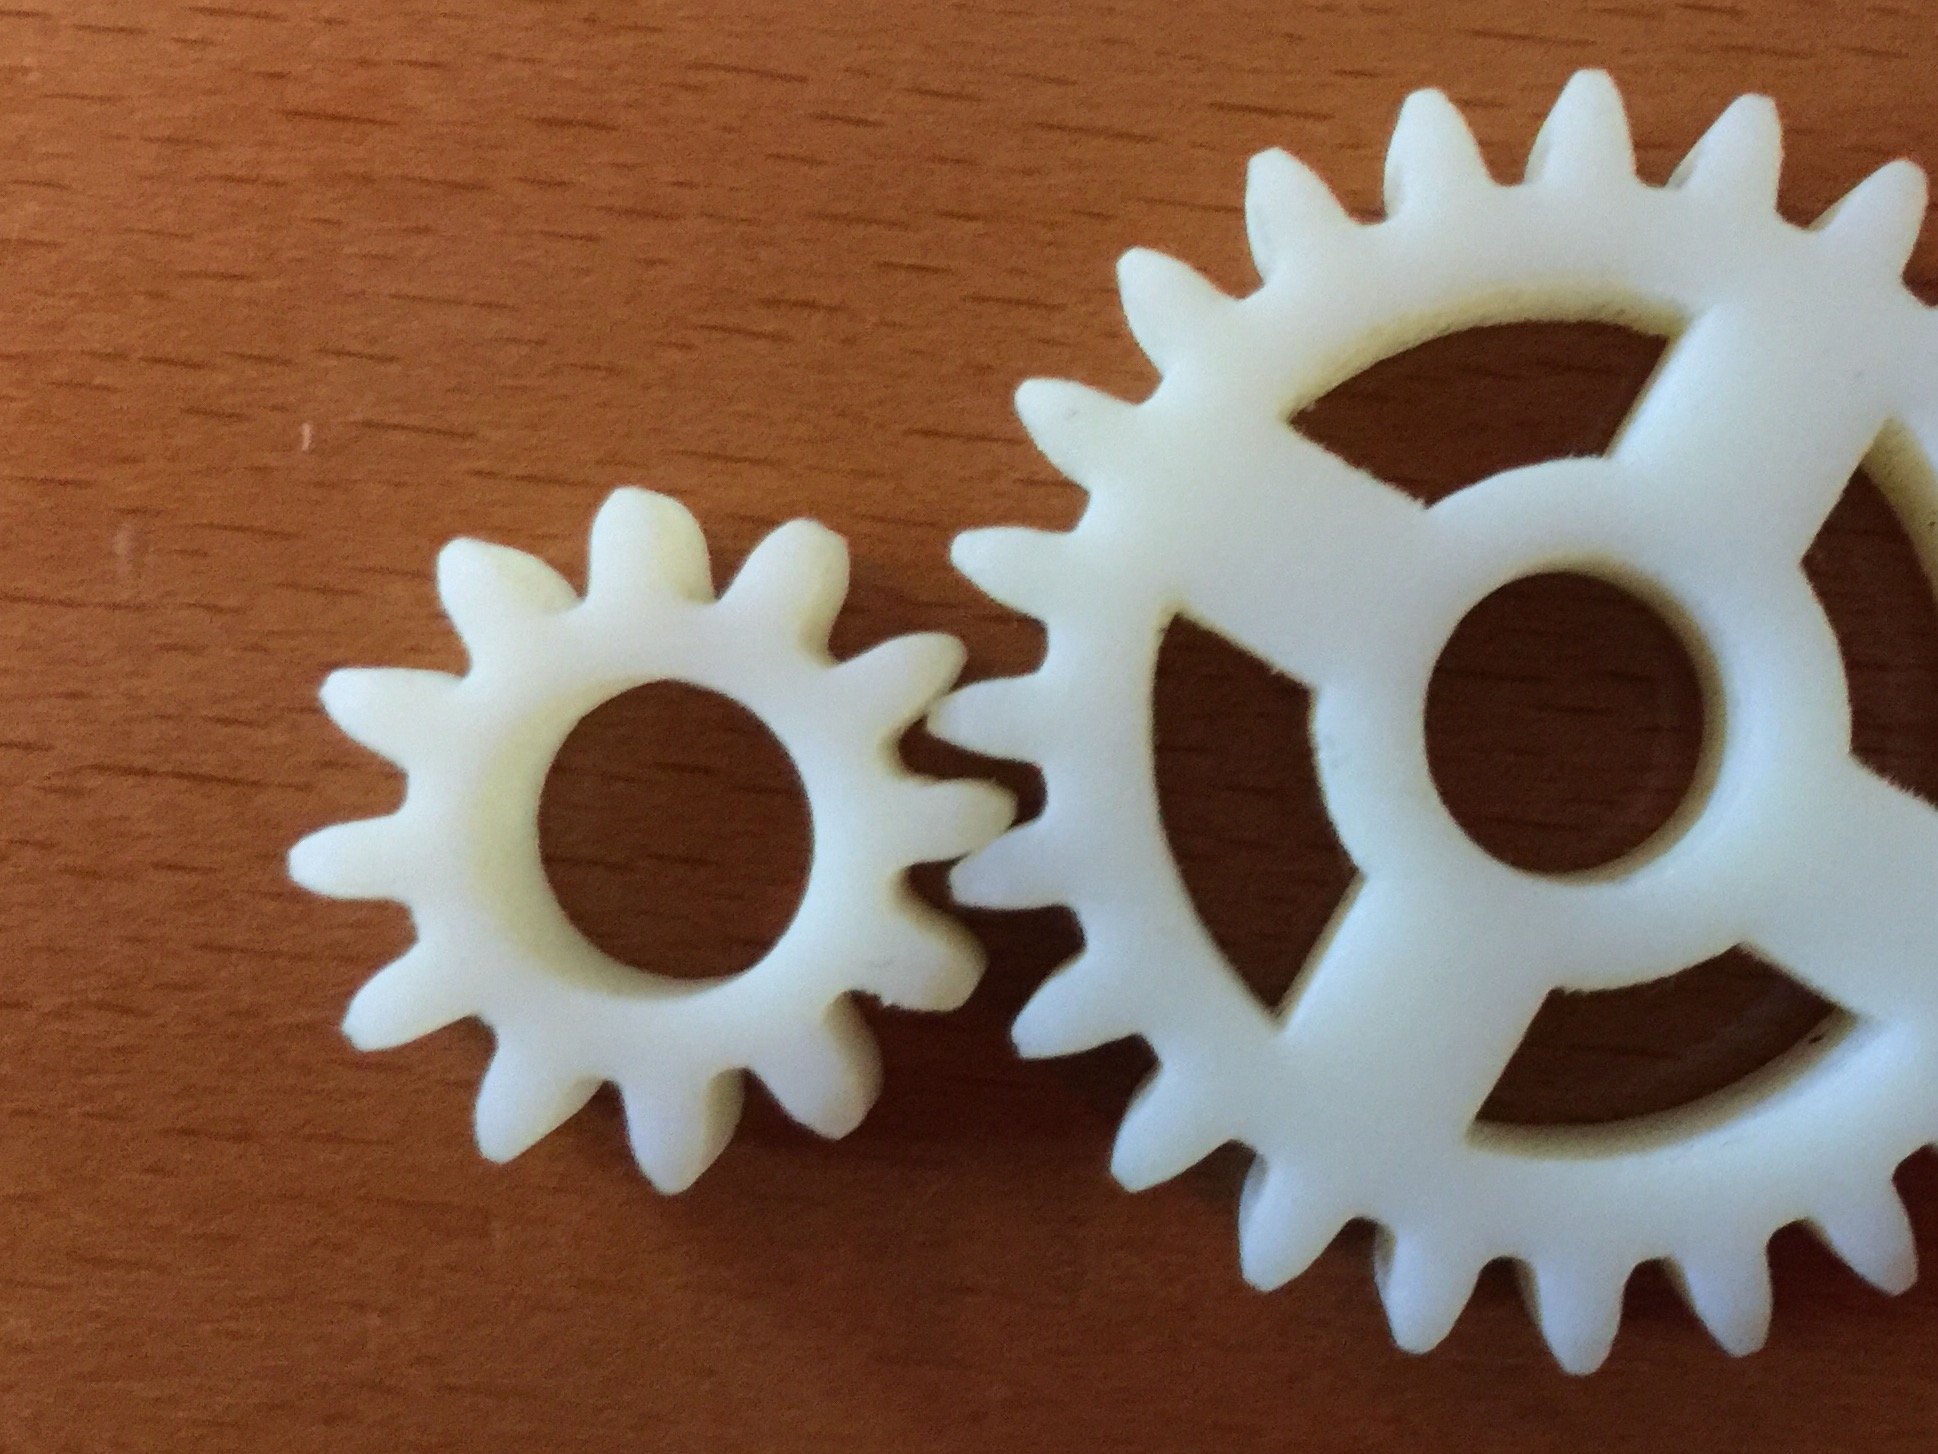 two gears operating at non-standard centre distance